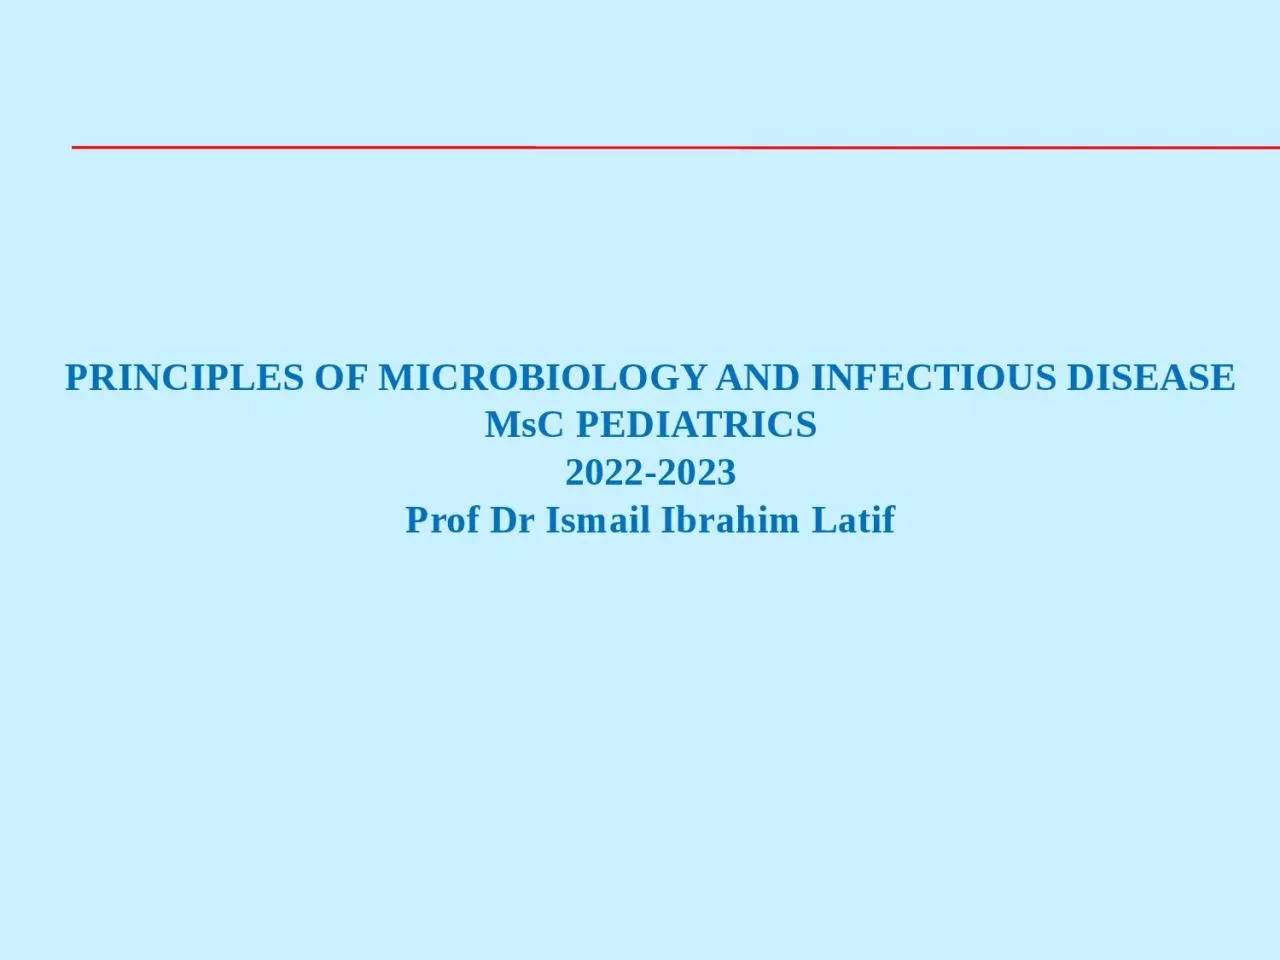 PRINCIPLES OF MICROBIOLOGY AND INFECTIOUS DISEASE